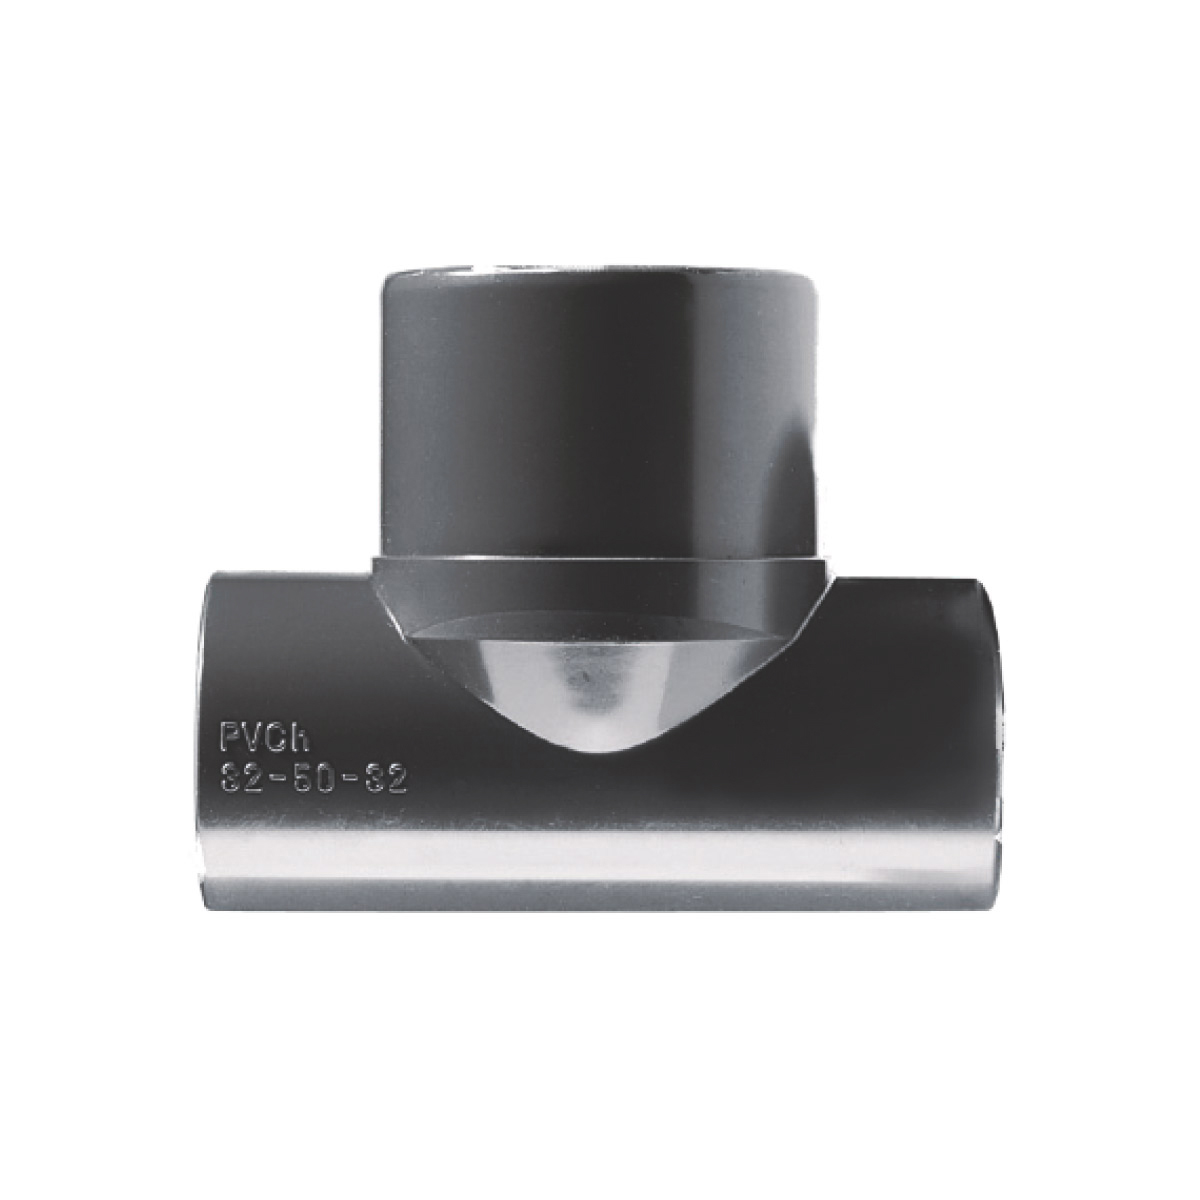 IBG® Tee 90° solvent socket (for whirlpools), grey d32-50-32 IBG® Tee 90° solvent socket (for whirlpools), grey d32-50-32